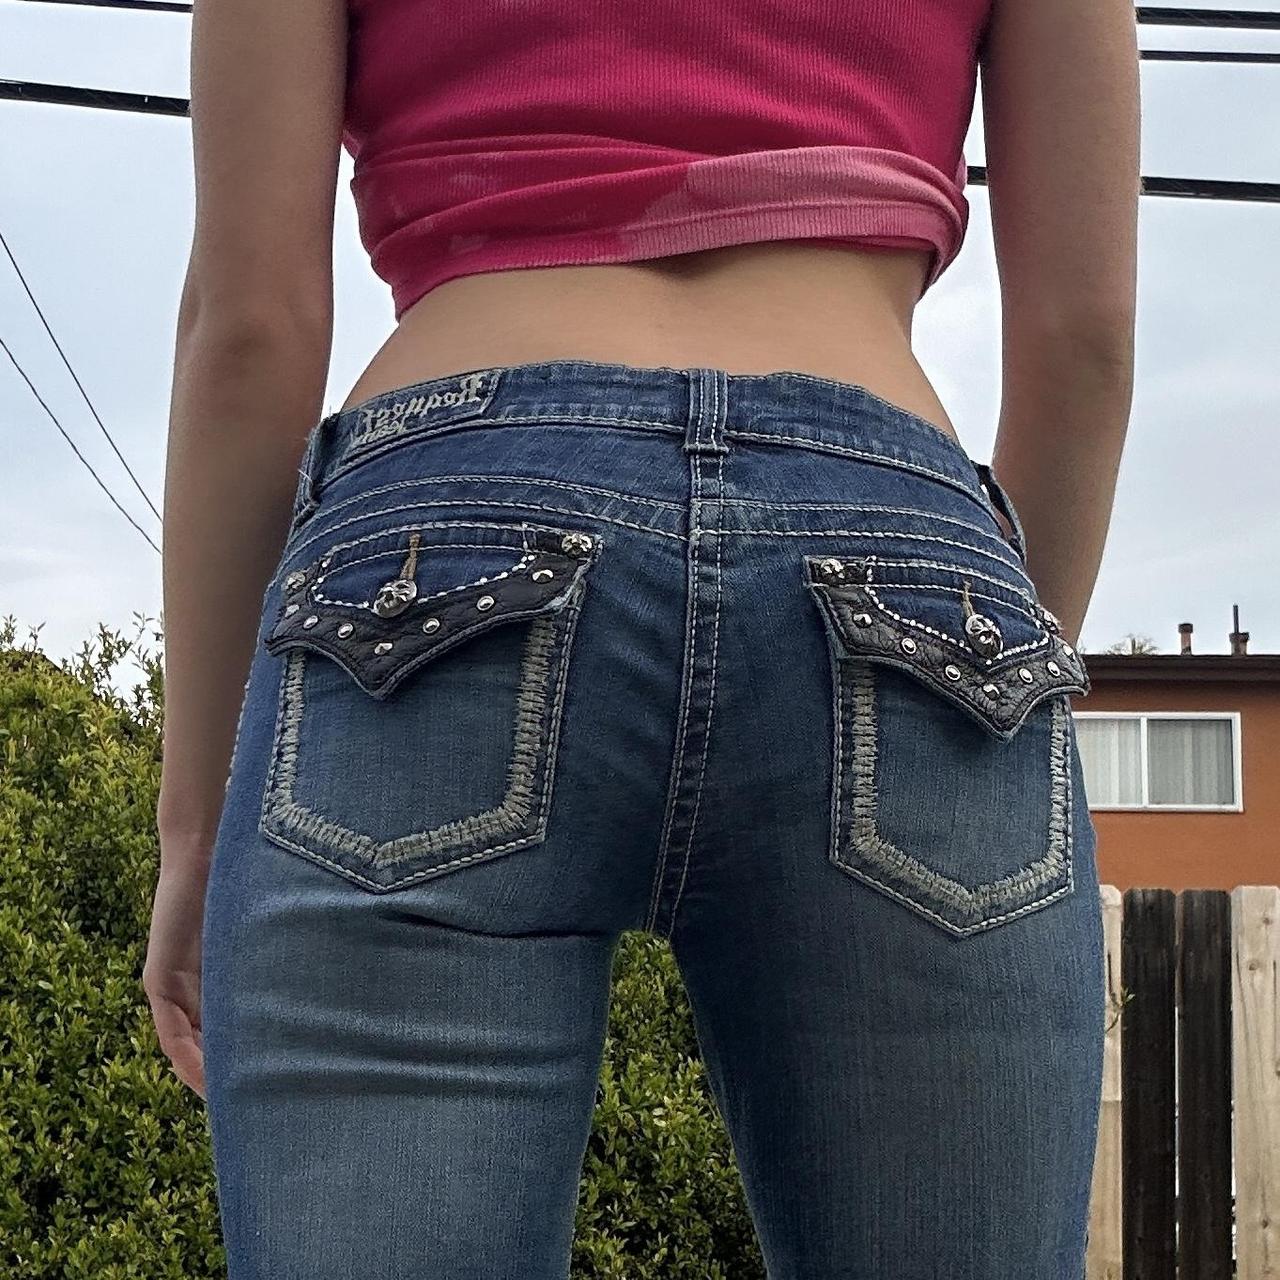 handmade lv jeans (too small on me now but included - Depop